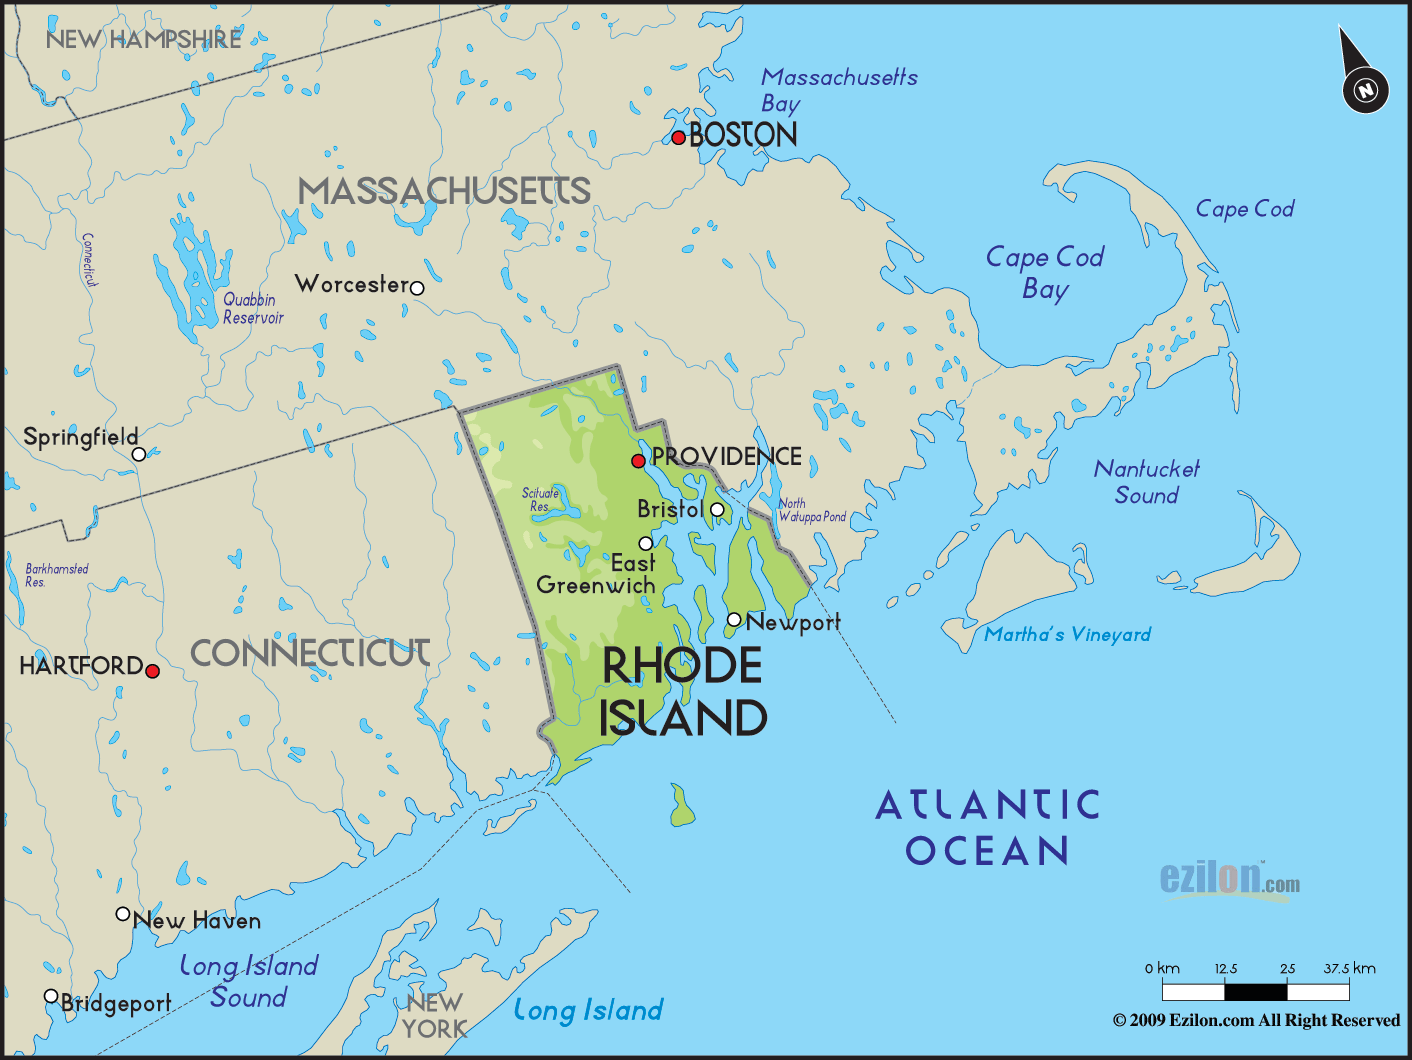 Download this Geographical Map Rhode Island And Details Maps picture